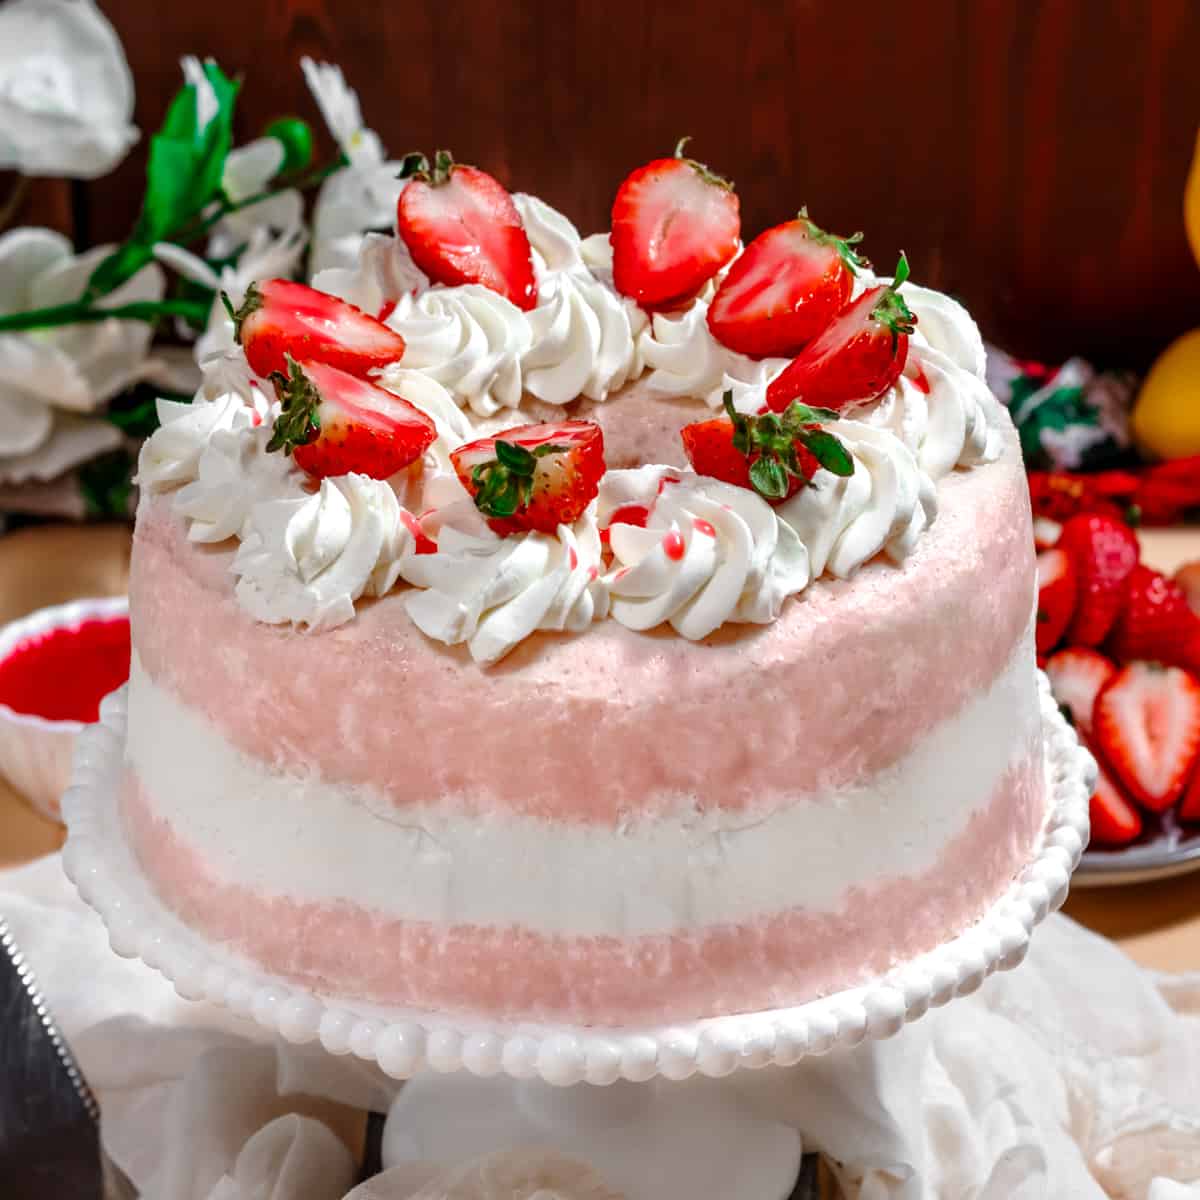 Strawberry Angel Food Cake - Meals by Molly